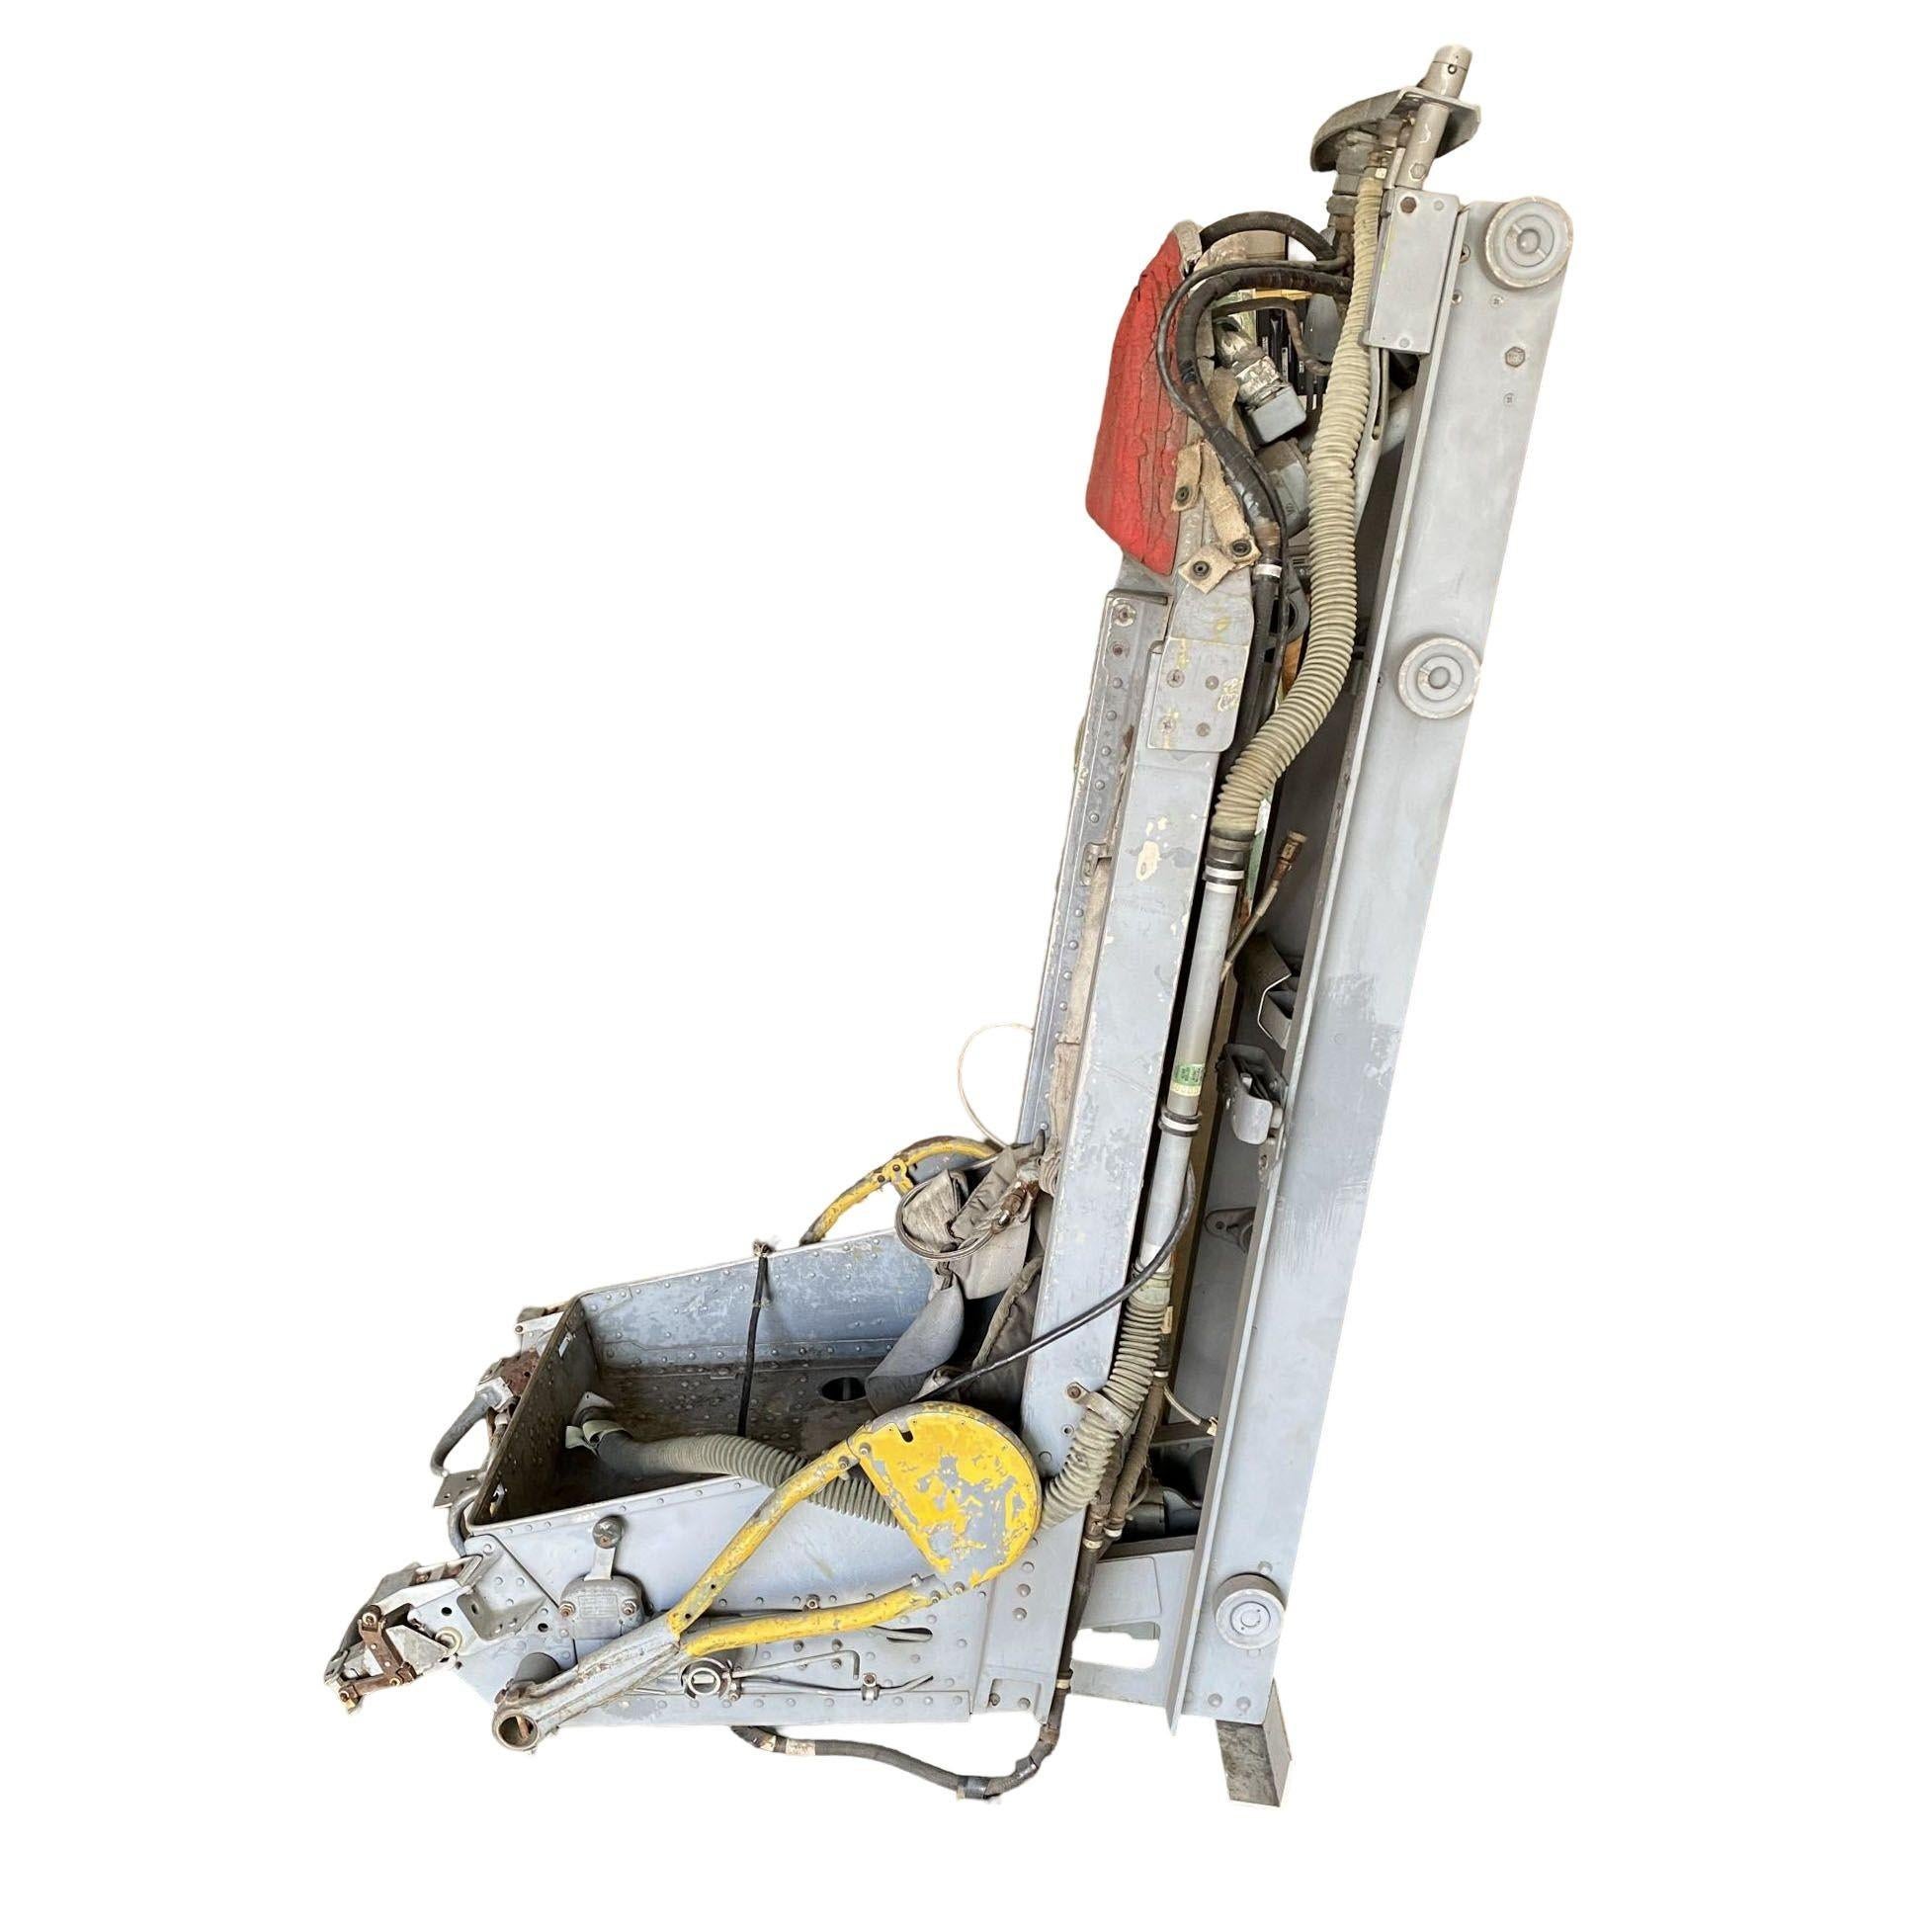 Industrial Boeing B-52 Bombardier's Ejection Seat For Lower Deck For Sale